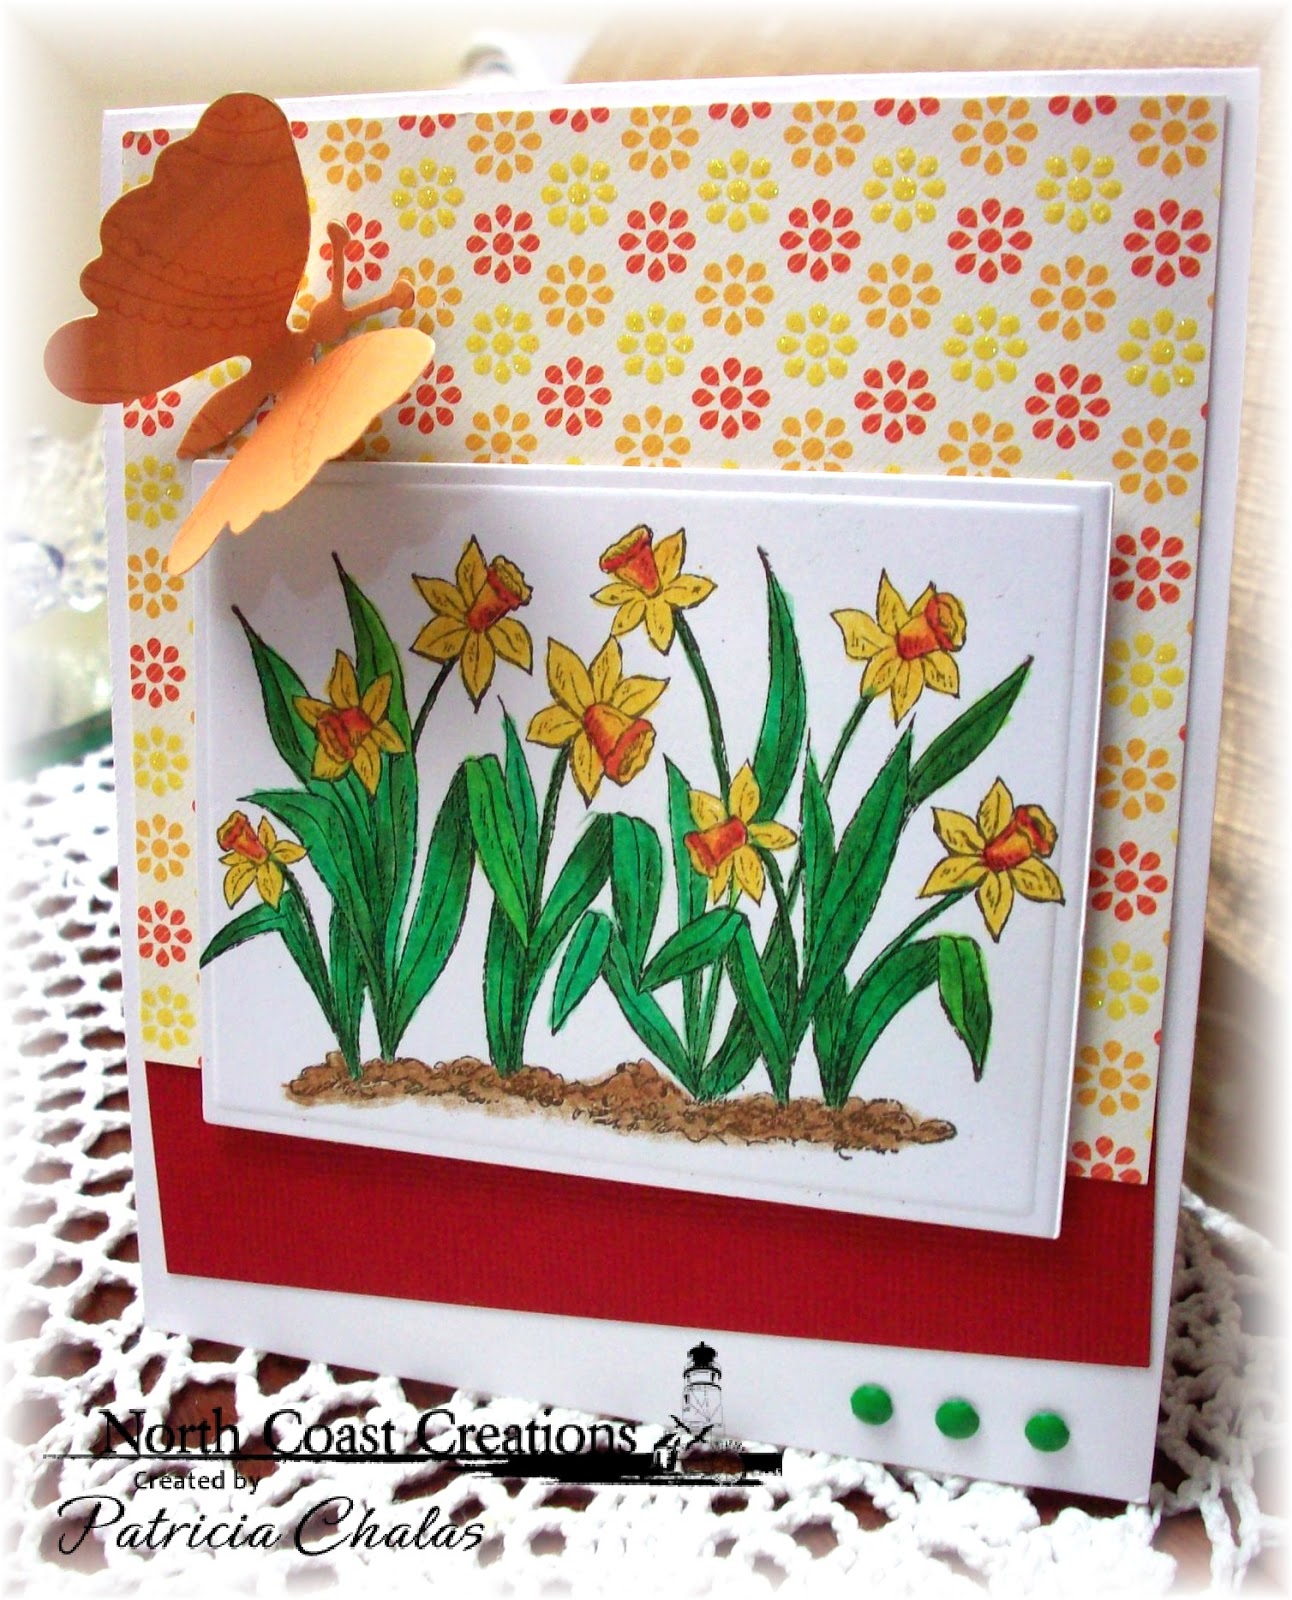 Stamps - North Coast Creations Daffodils